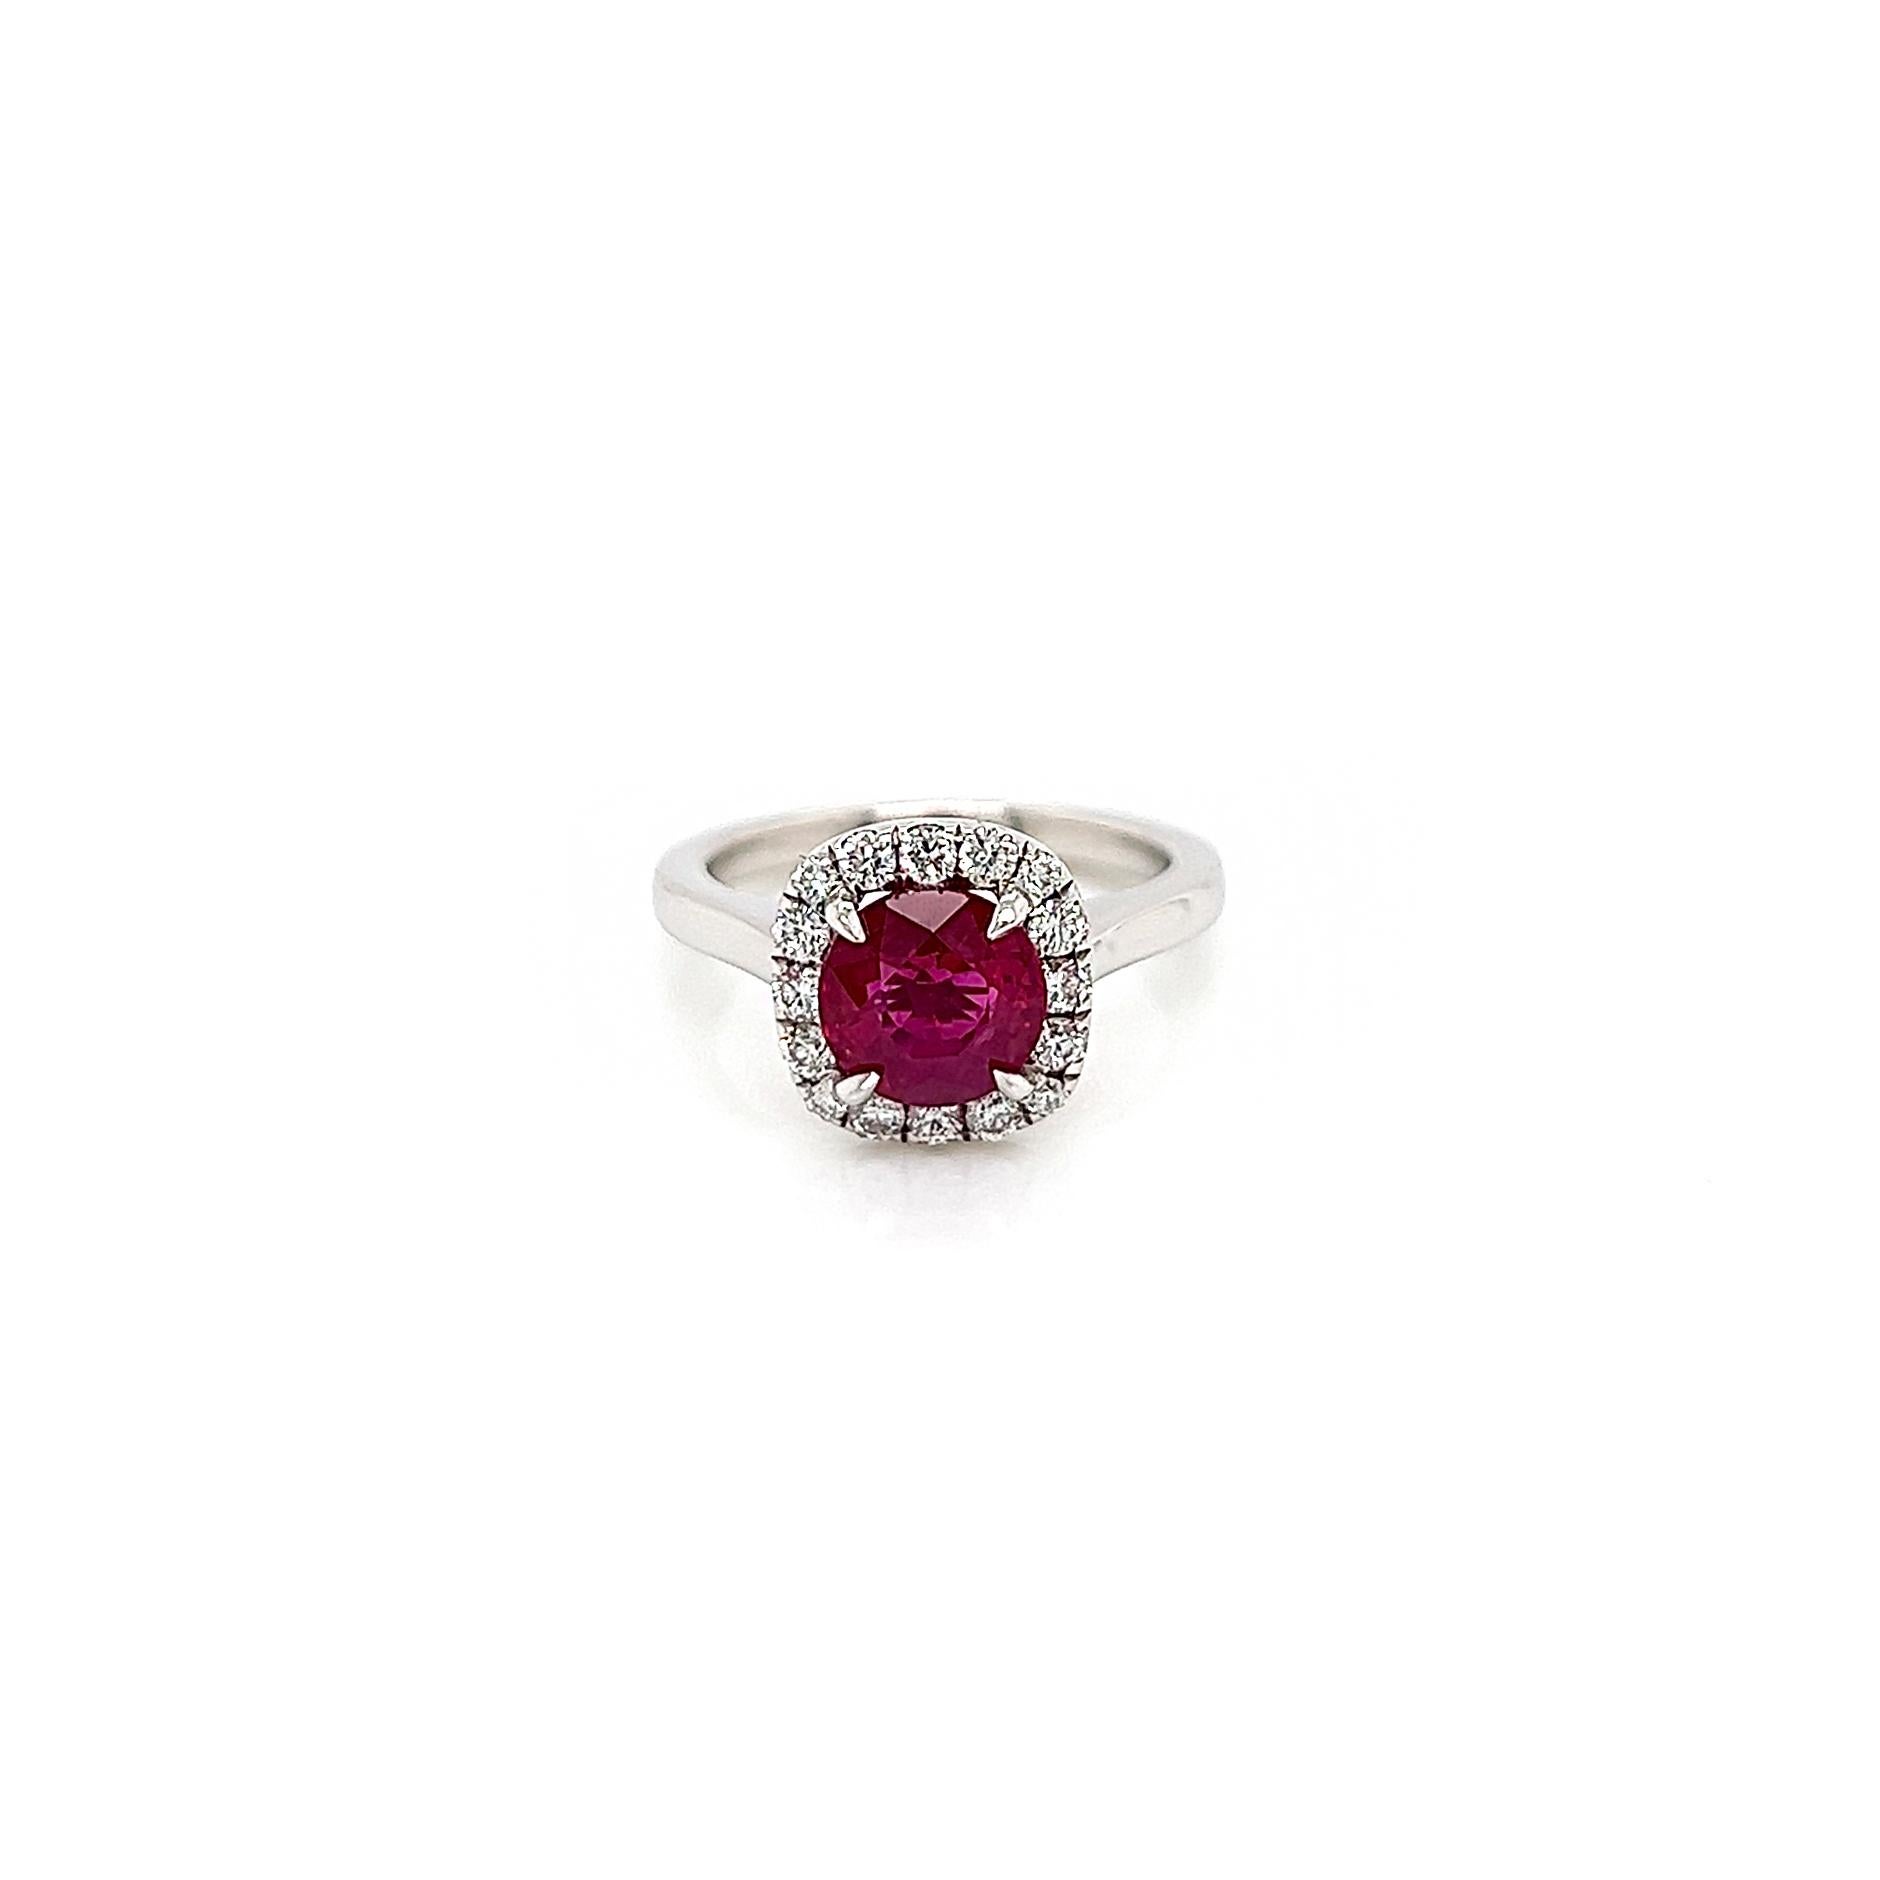 1.82 Total Carat Ruby and Diamond Halo Ladies Engagement Ring

Delightfully colorful, Brilliant round white diamonds surround the center mounting, line the shank, and illuminate the gallery of this beautiful ruby diamond engagement ring. The perfect